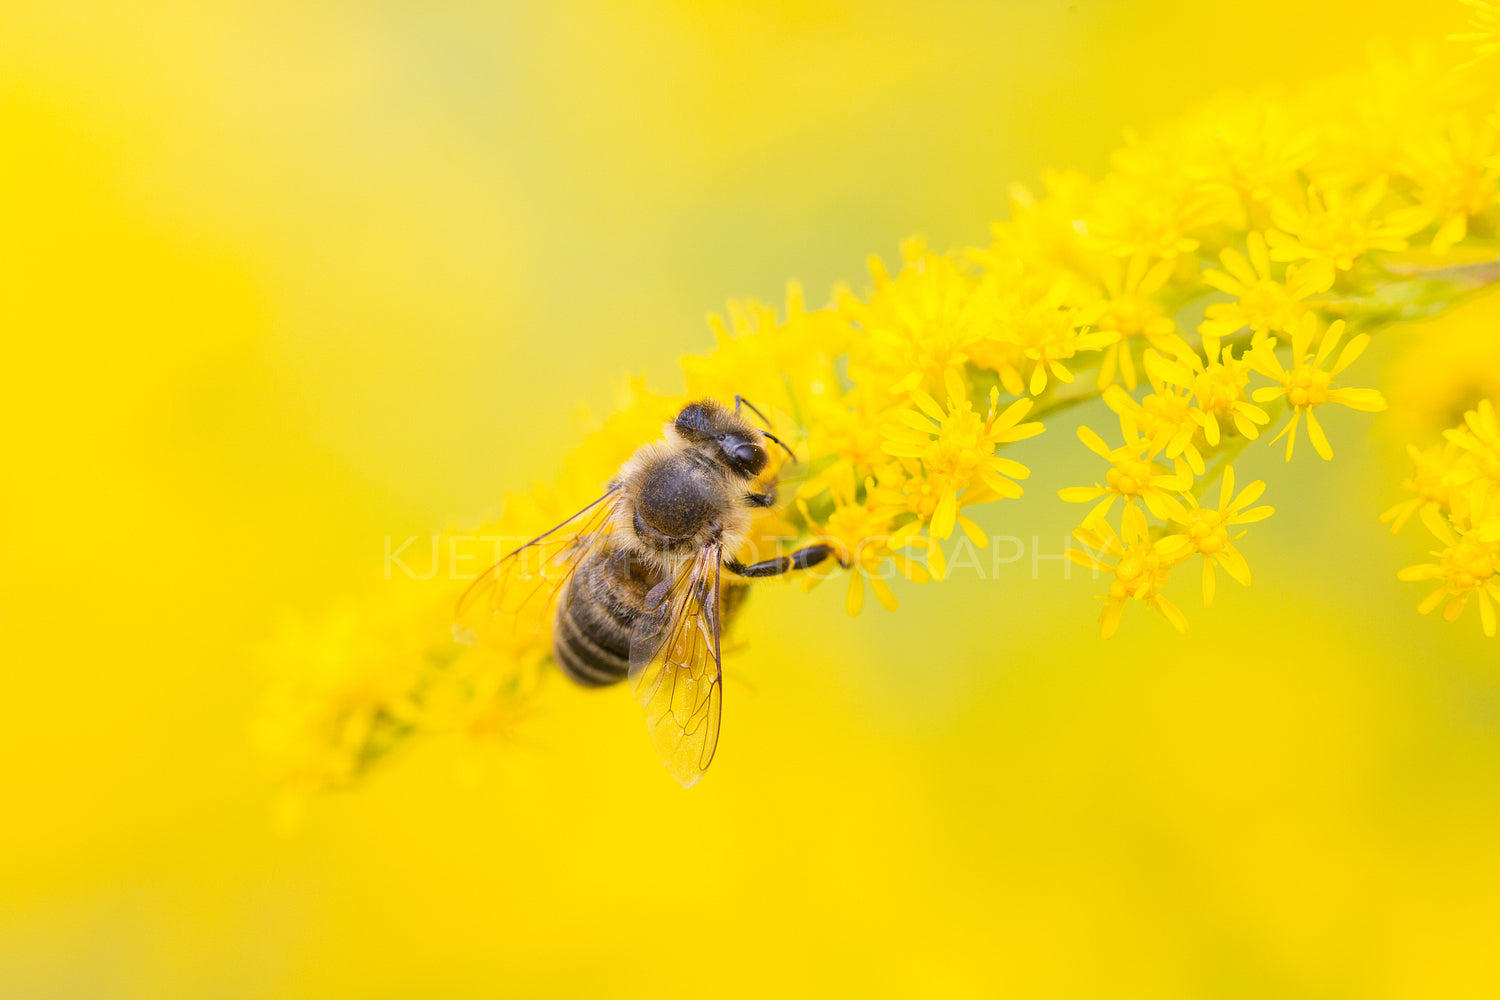 Bee feed on nectar and pollen